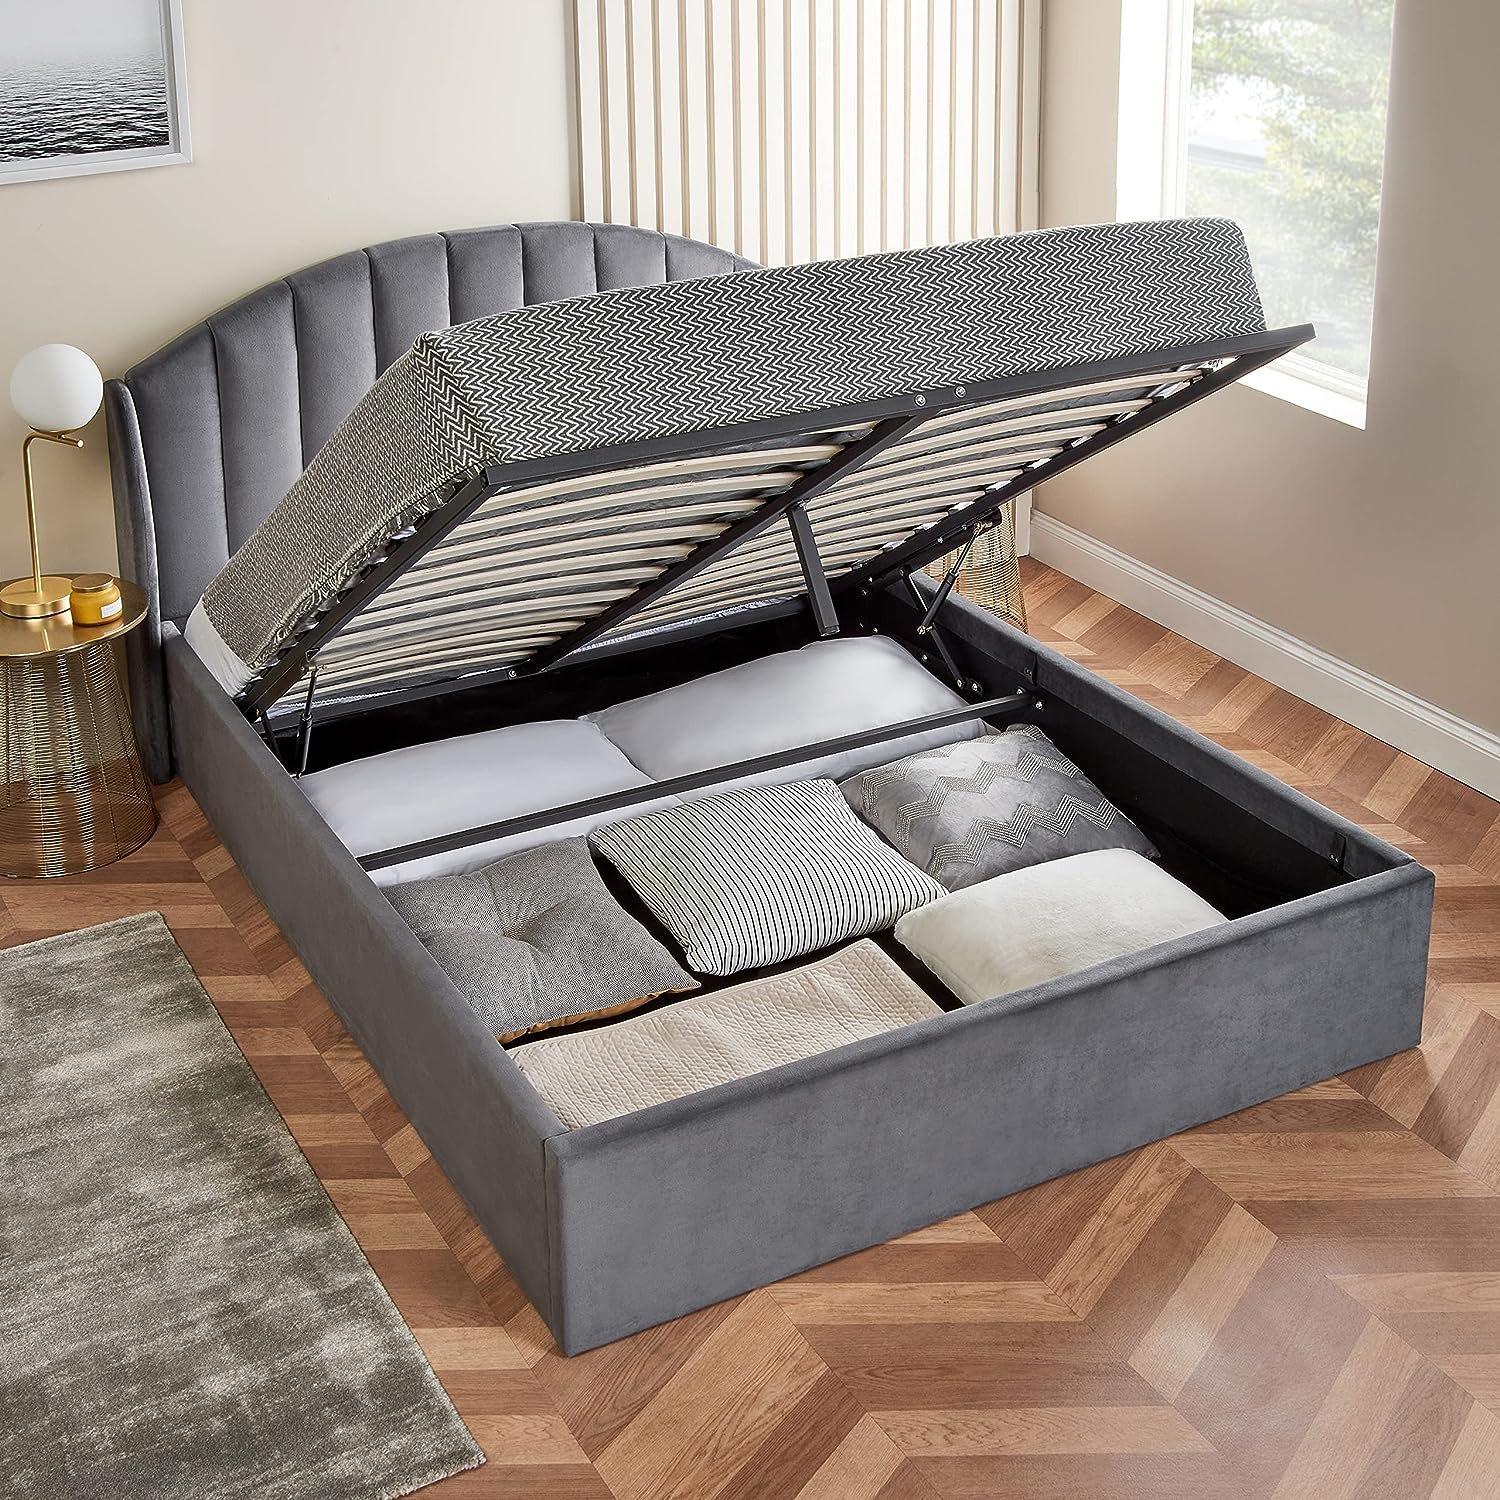 Ottoman Bed Curved Winged Headboard Ottoman Storage Bed